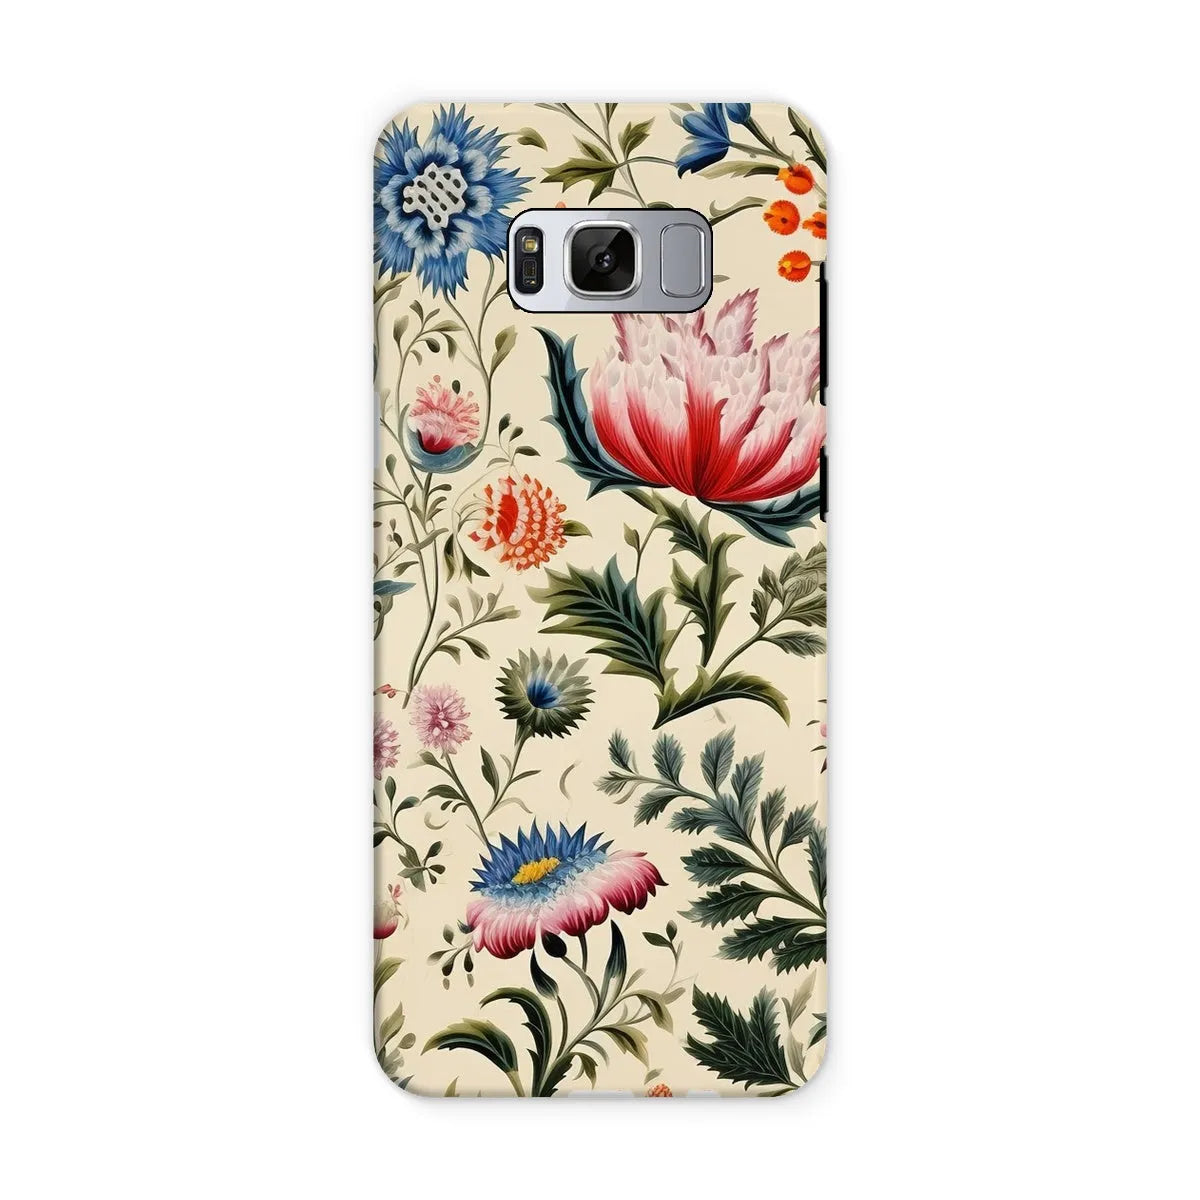 Wildflower Hoopla - Floral Garden Aesthetic Phone Case - Samsung Galaxy S8 / Matte - Mobile Phone Cases - Aesthetic Art